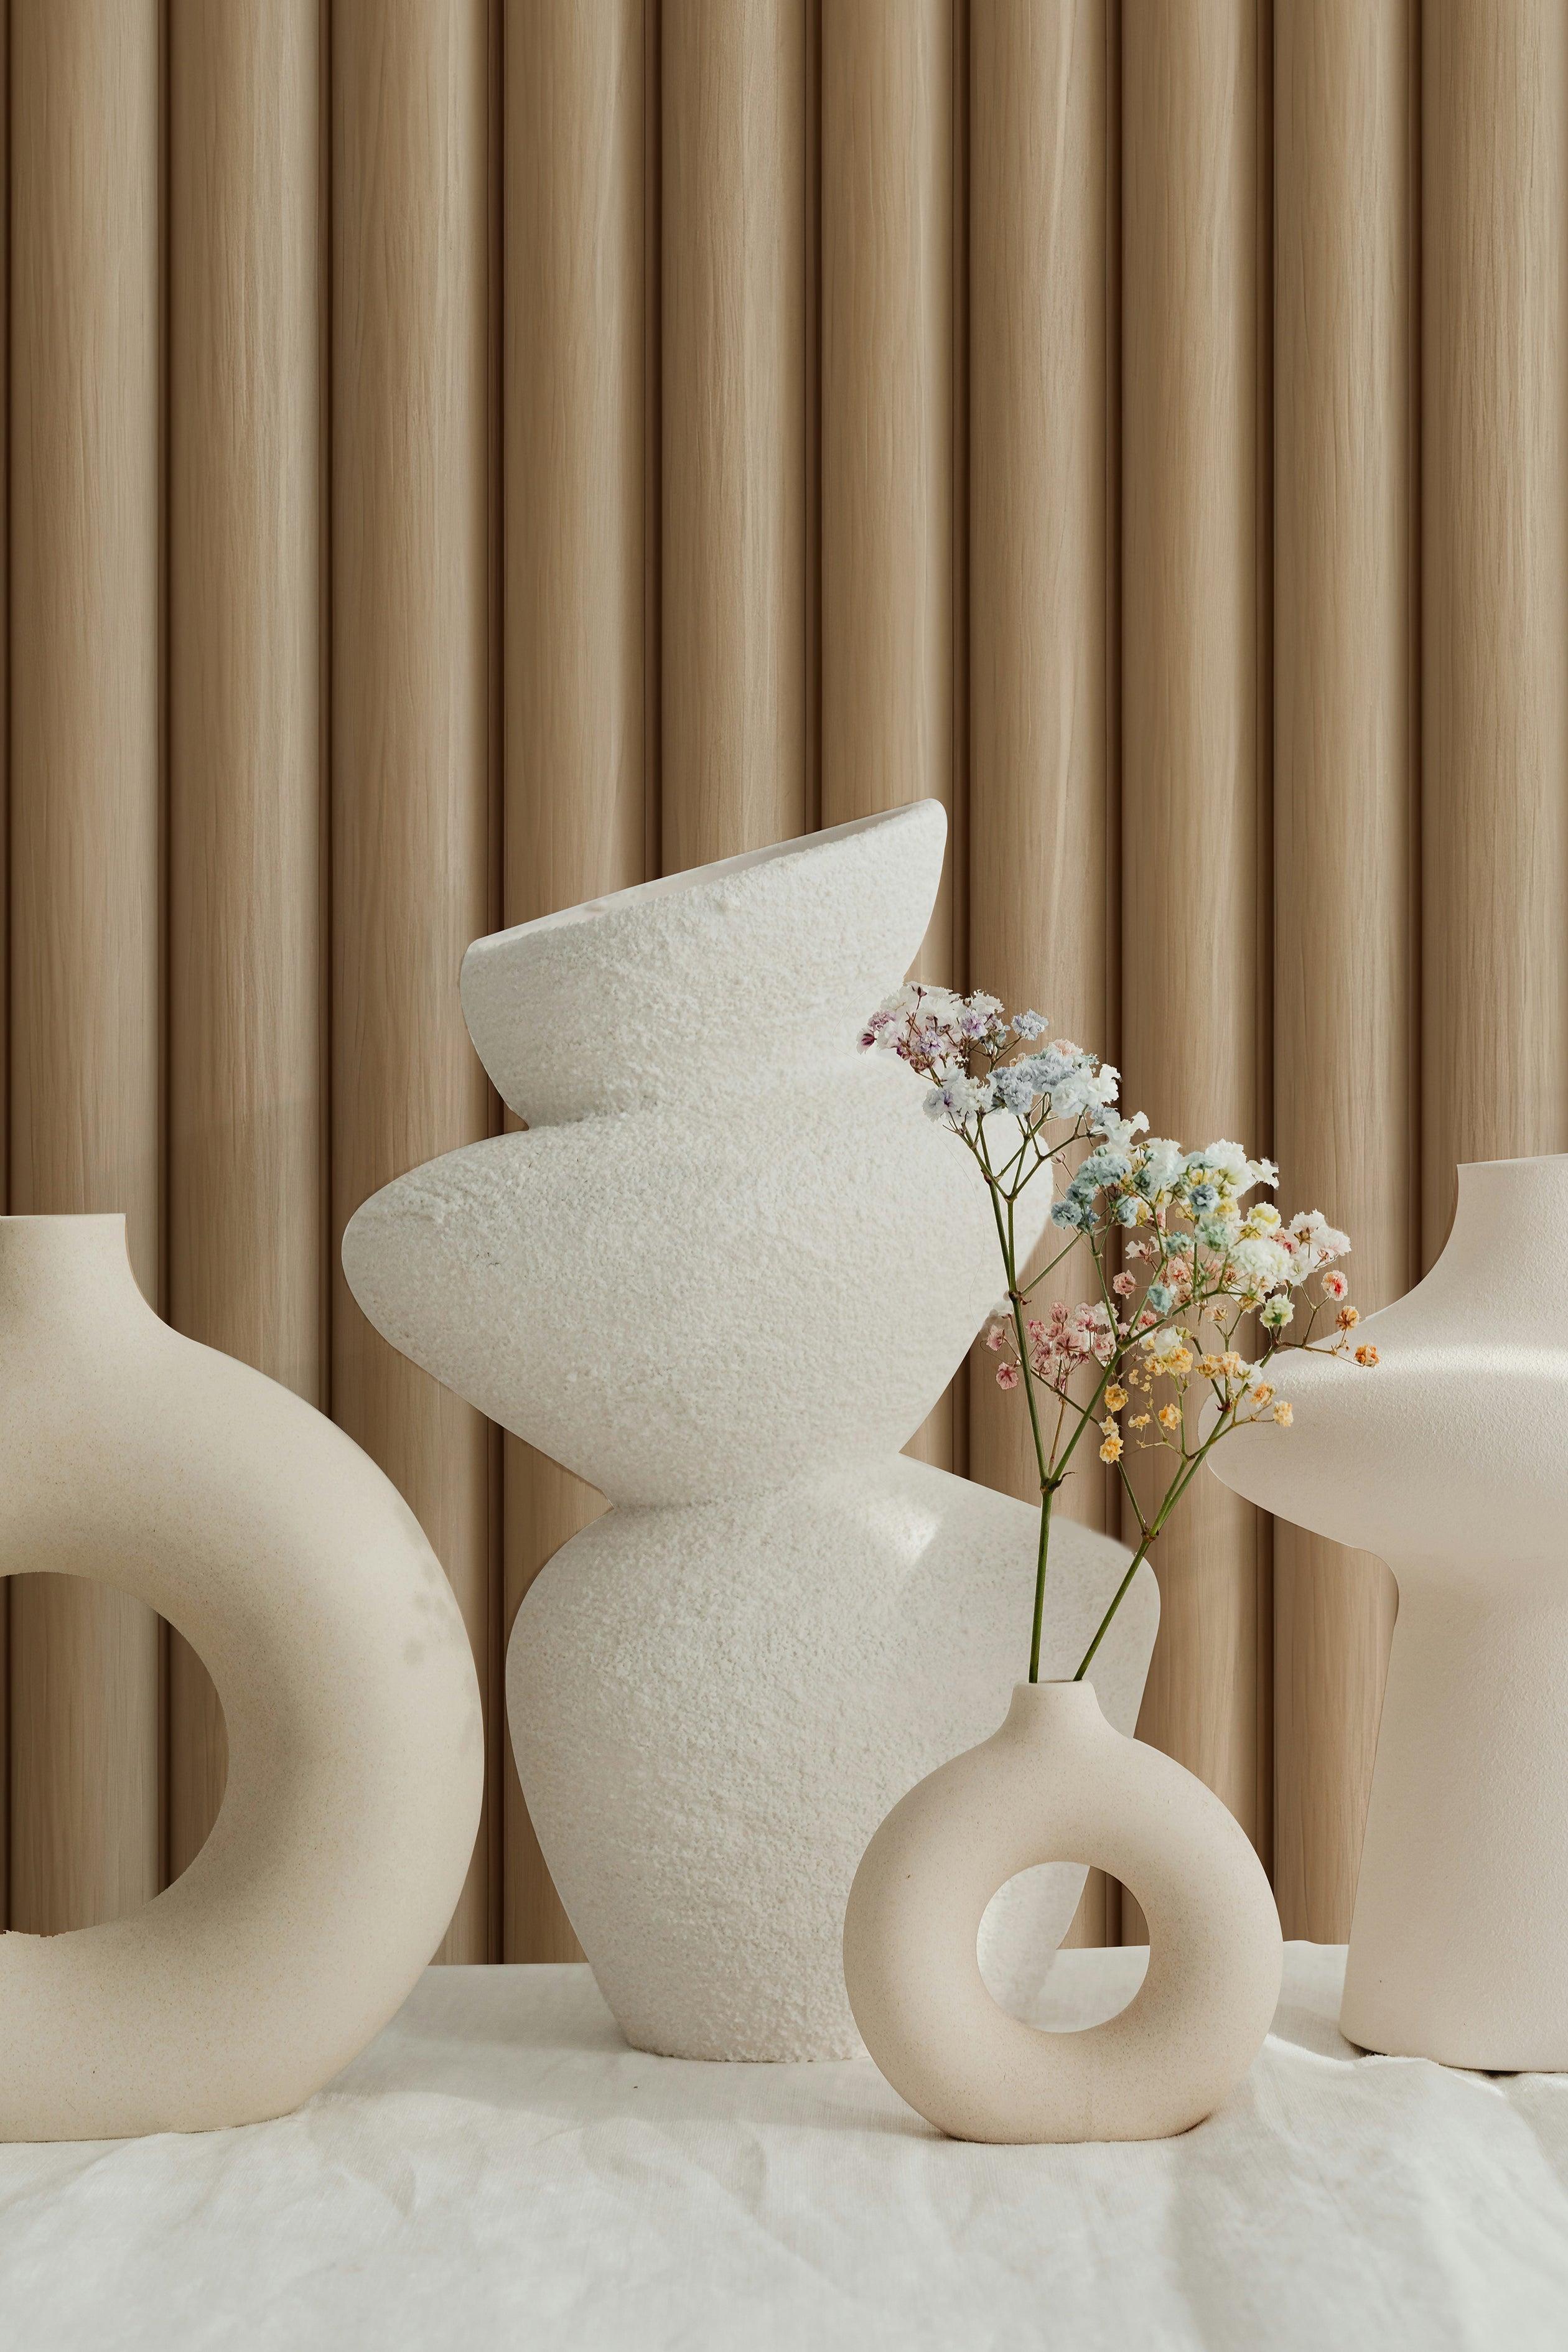 An arrangement of modern ceramic vases in various shapes and textures, set against the backdrop of Wooden Pillar Wallpaper with vertical grooves in a warm wood tone. The wallpaper's texture enhances the visual appeal of the minimalist decor.